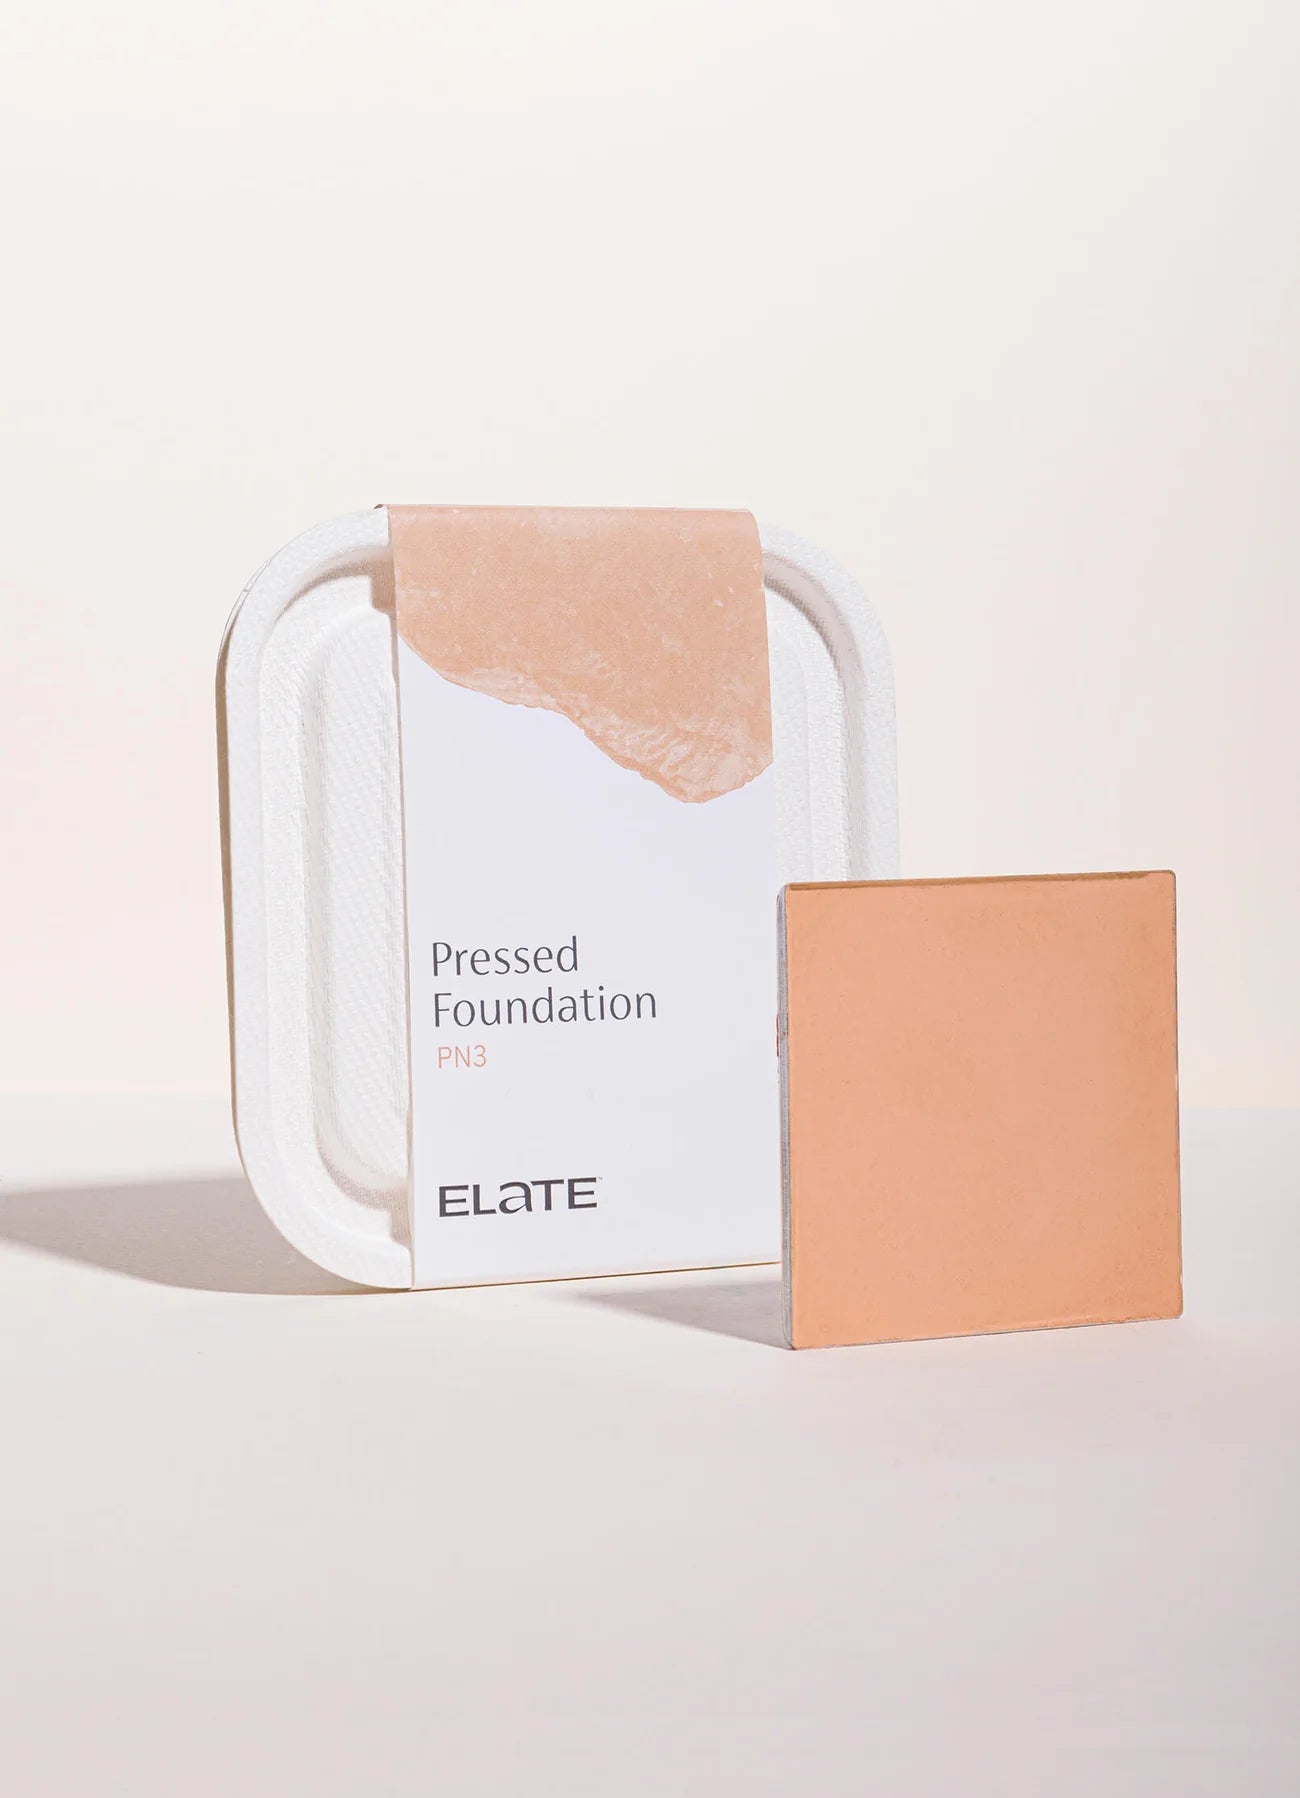 Elate cosmetics pressed foundation packaging and pan